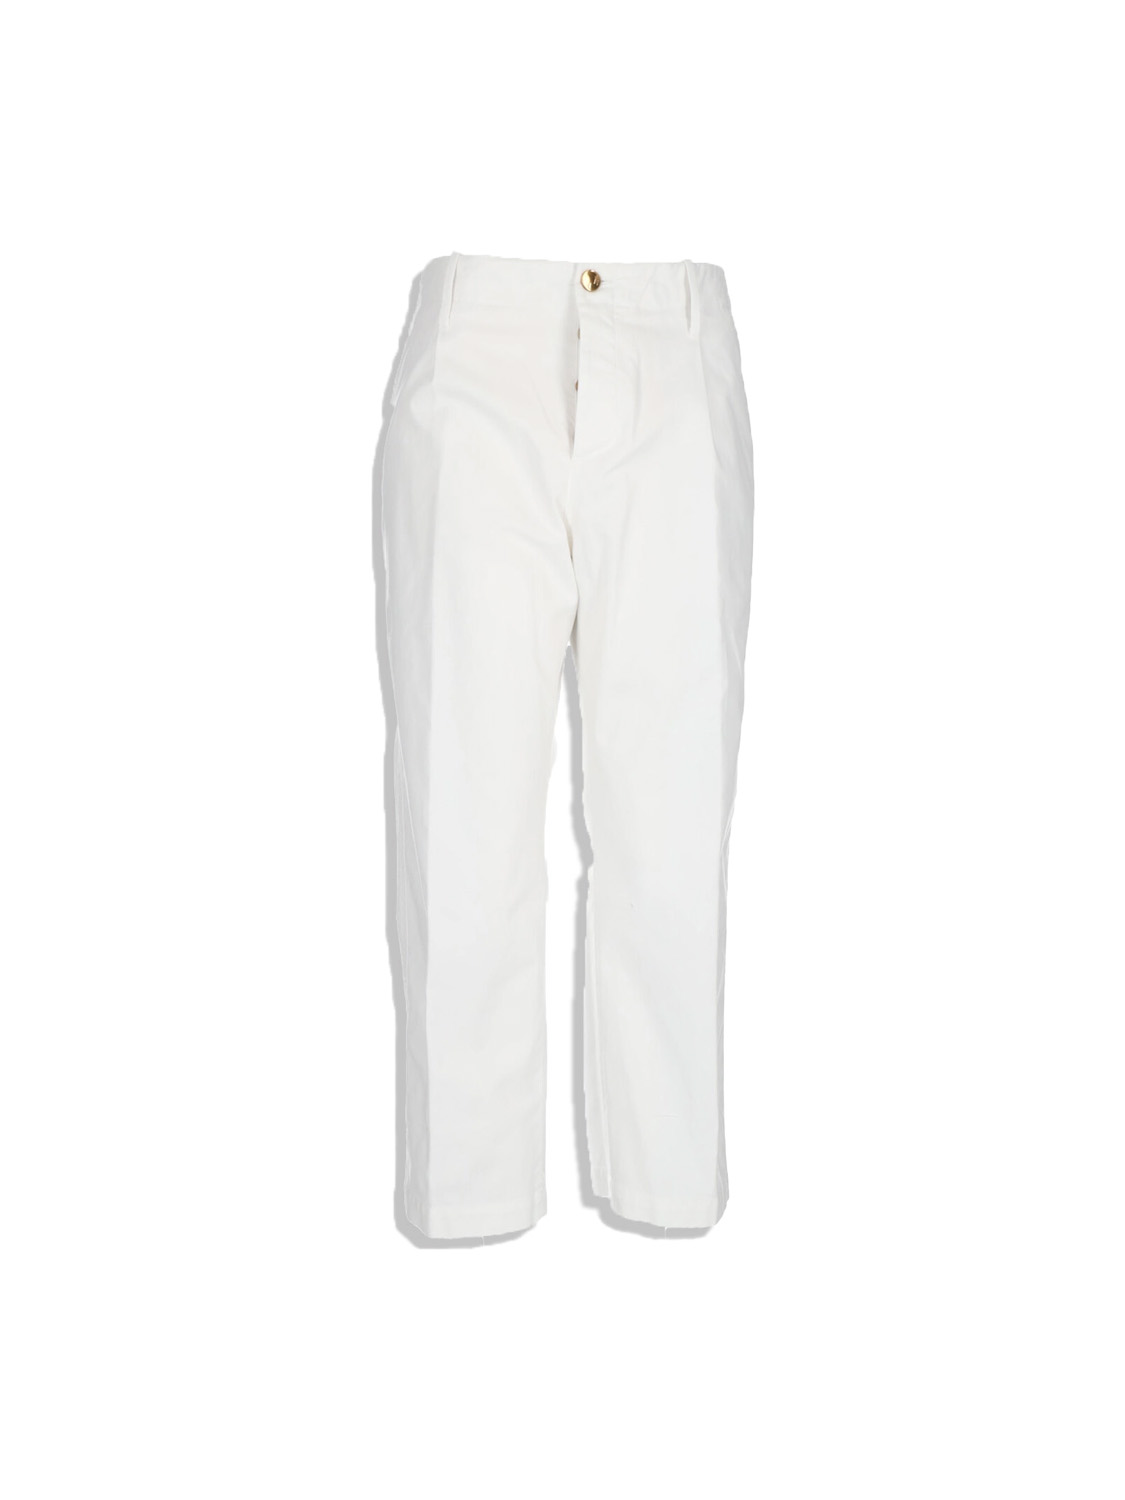 Straight cut cotton trousers